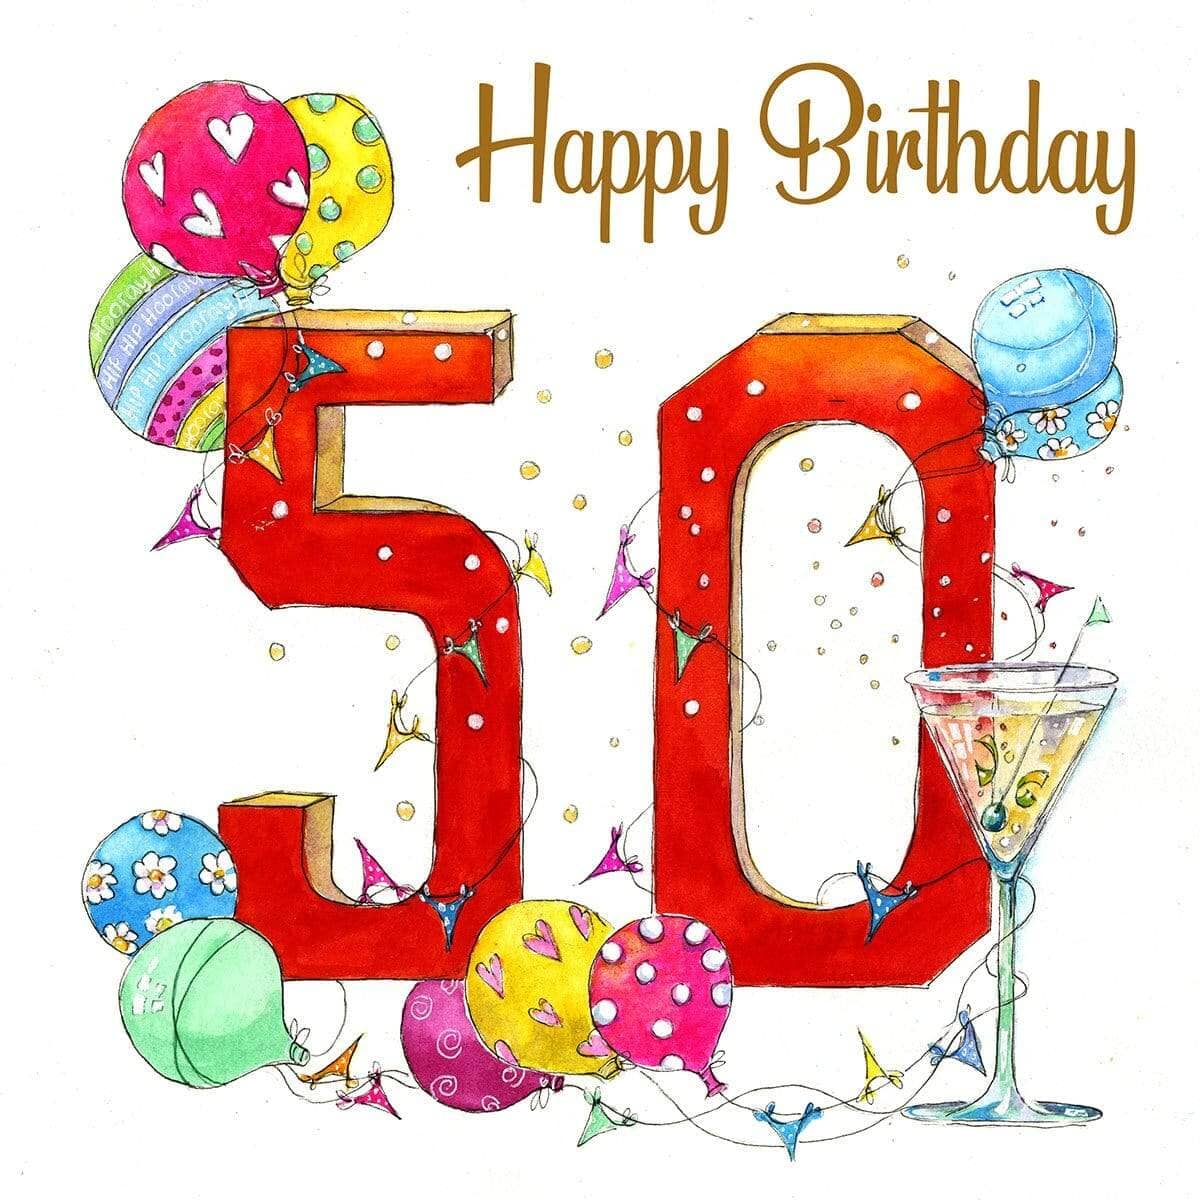 50 & Fabulous: A Birthday Card for the Big 50